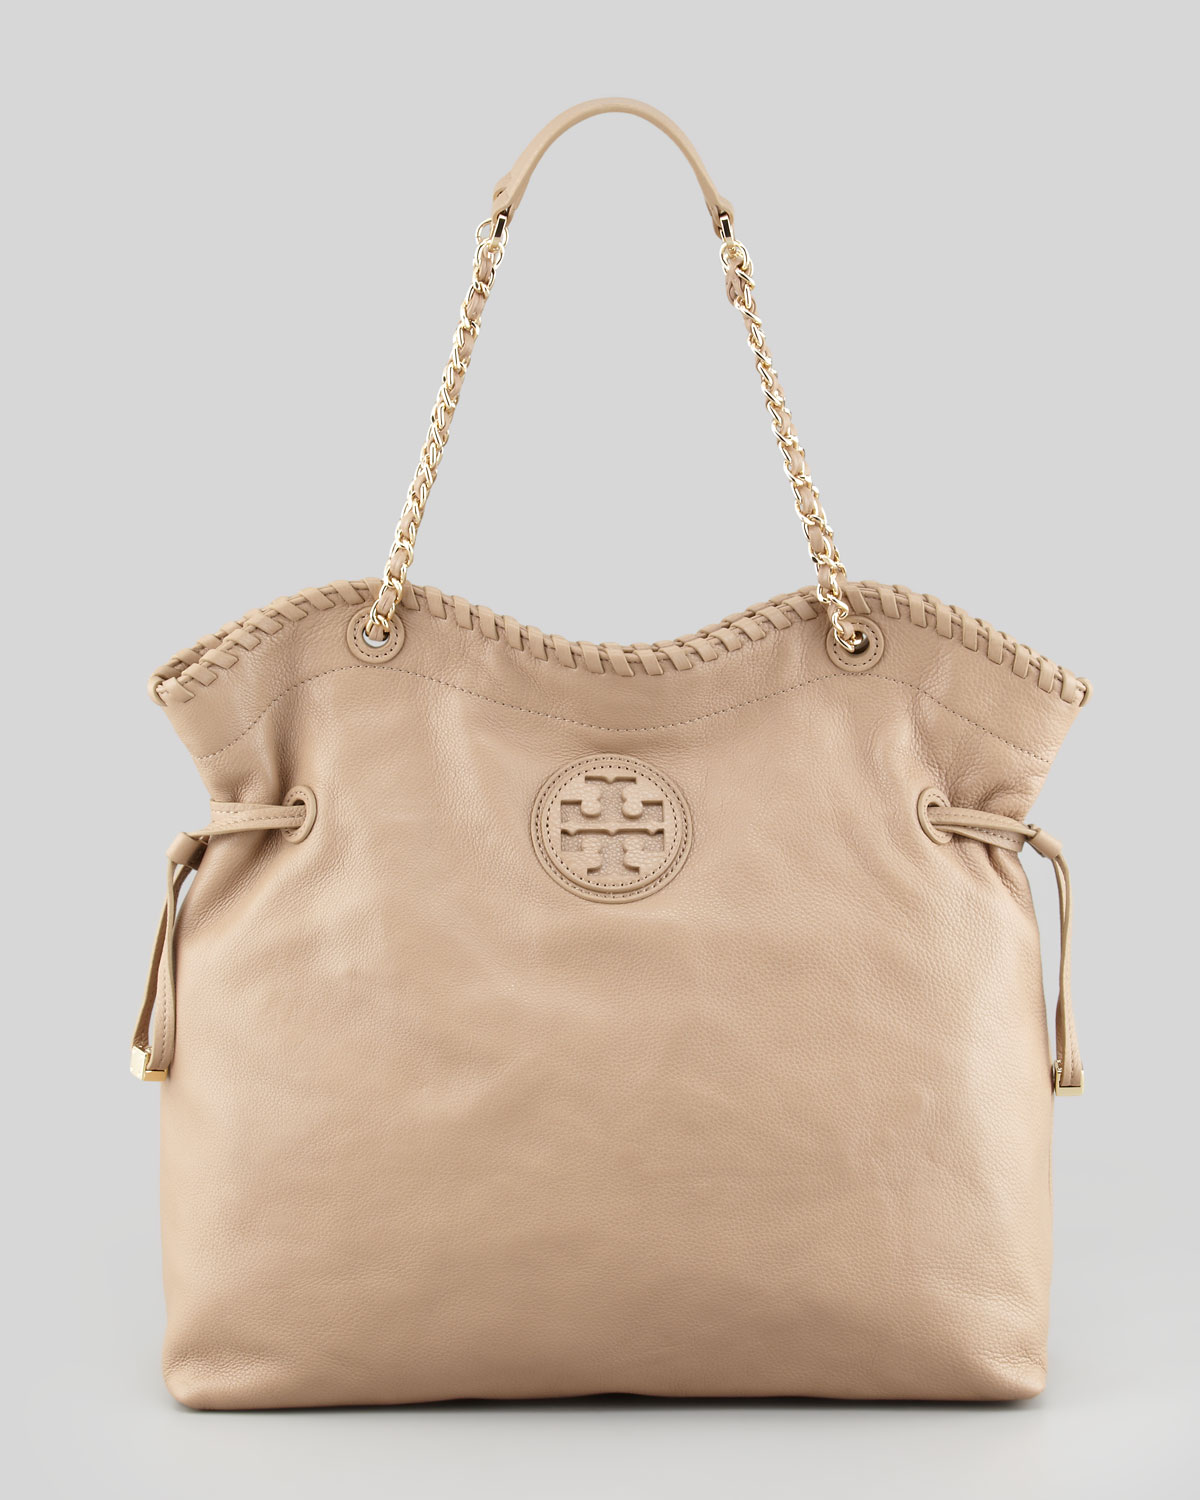 Lyst - Tory Burch Marion Slouchy Leather Tote Bag Clay Beige in Brown